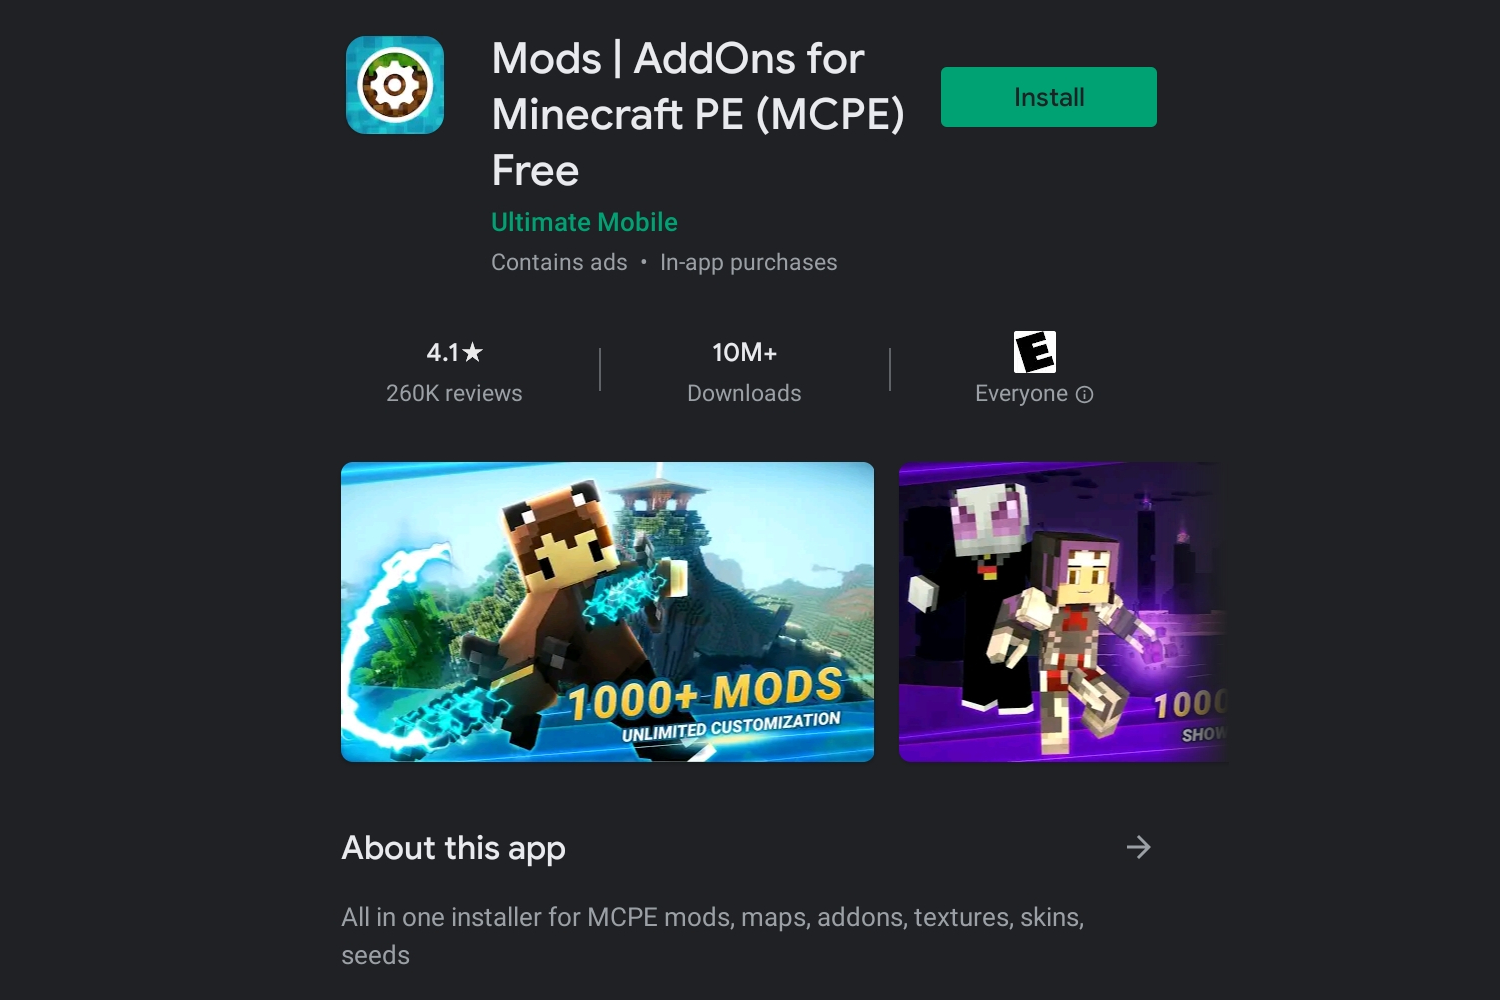 The Mods Addons app download page for MCPE.